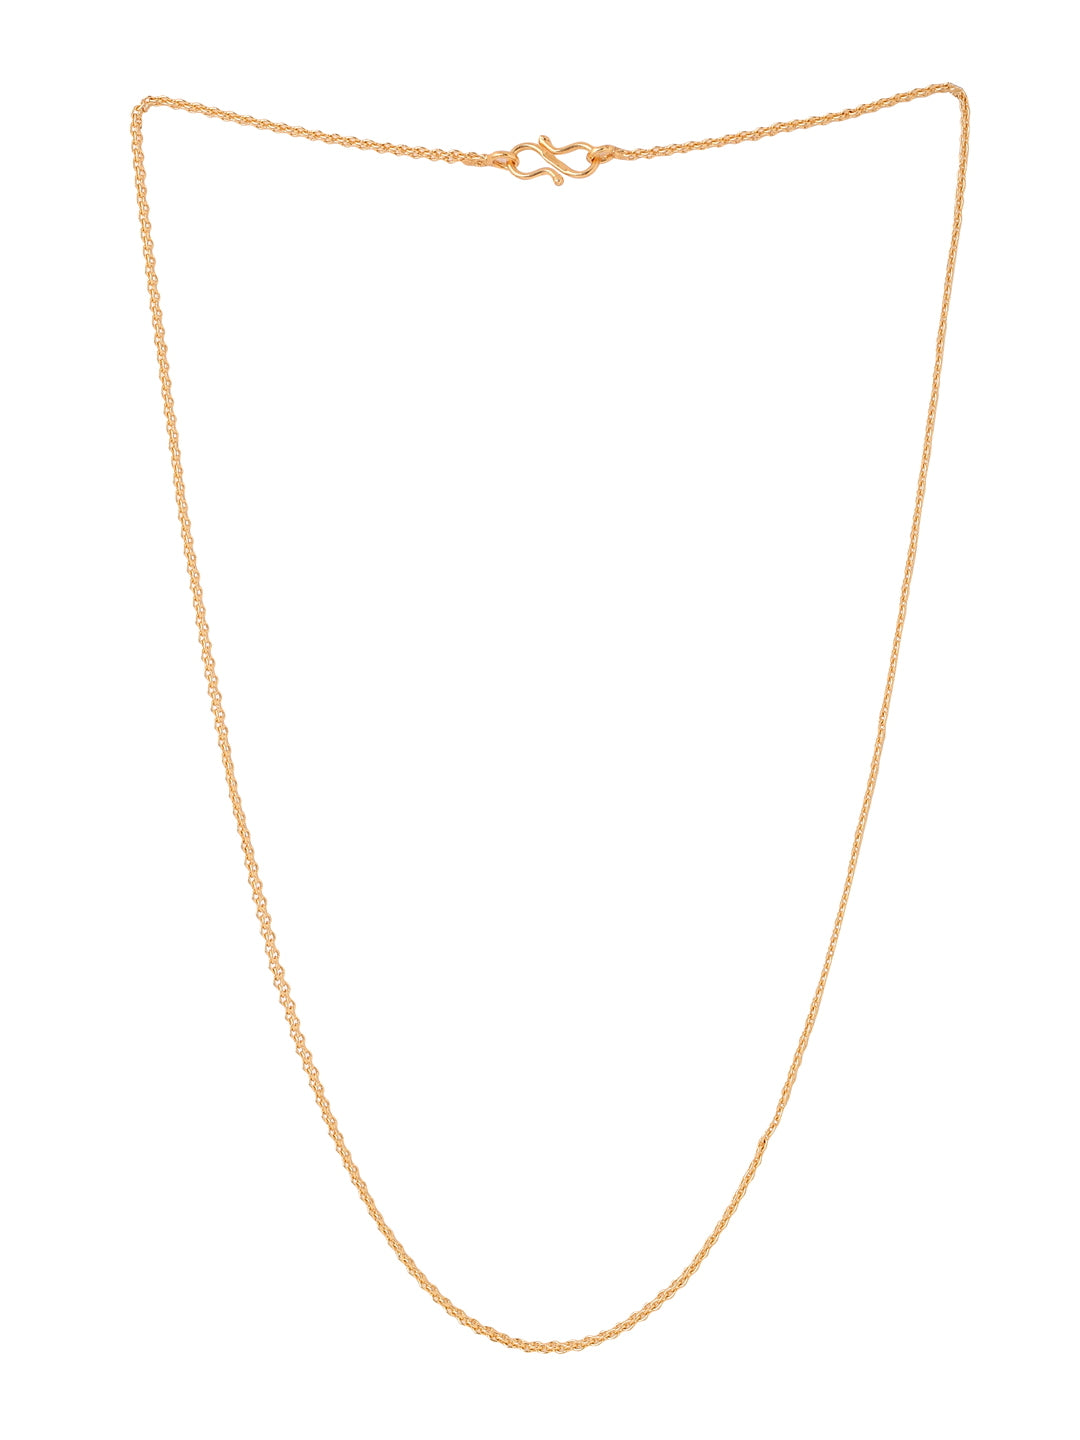 Stylish Gold Plated Rollo Chain for Men